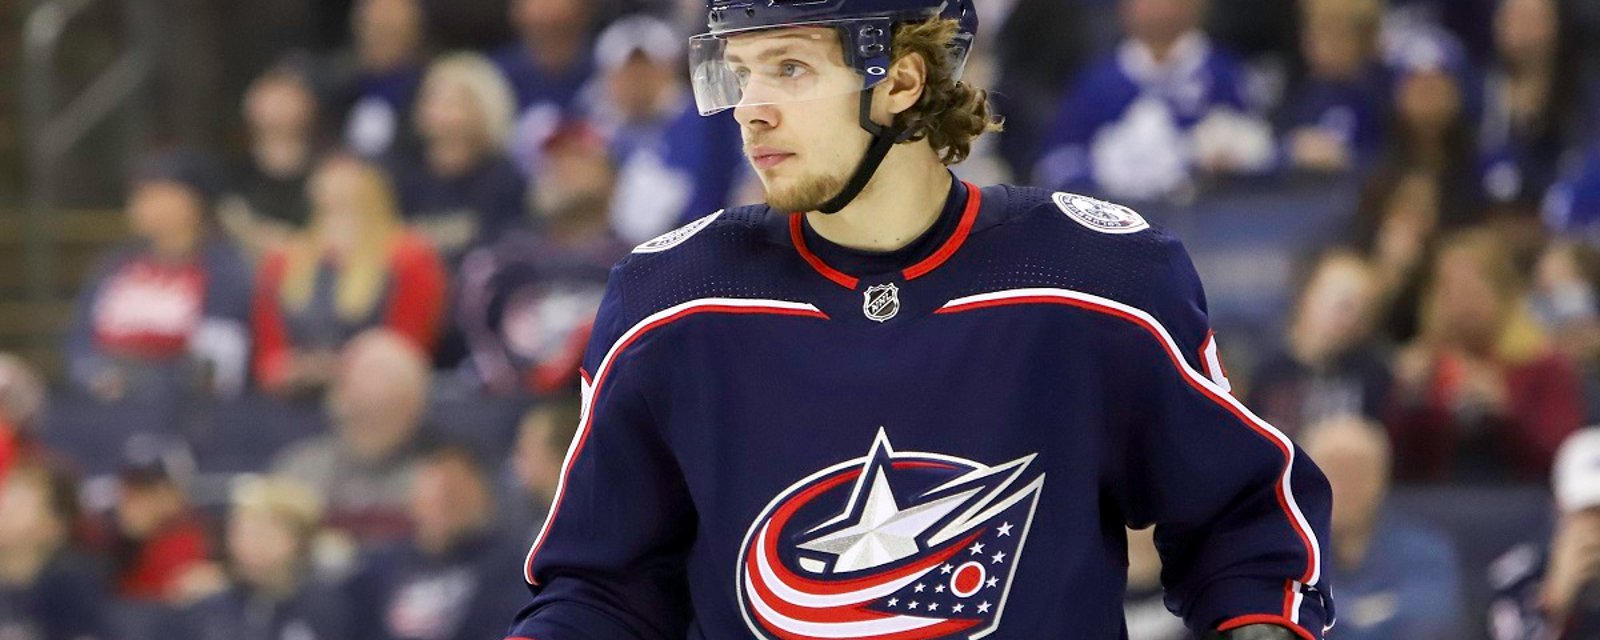 Rumor: Dark horse emerges as possible landing spot for both Panarin and Bobrovsky.